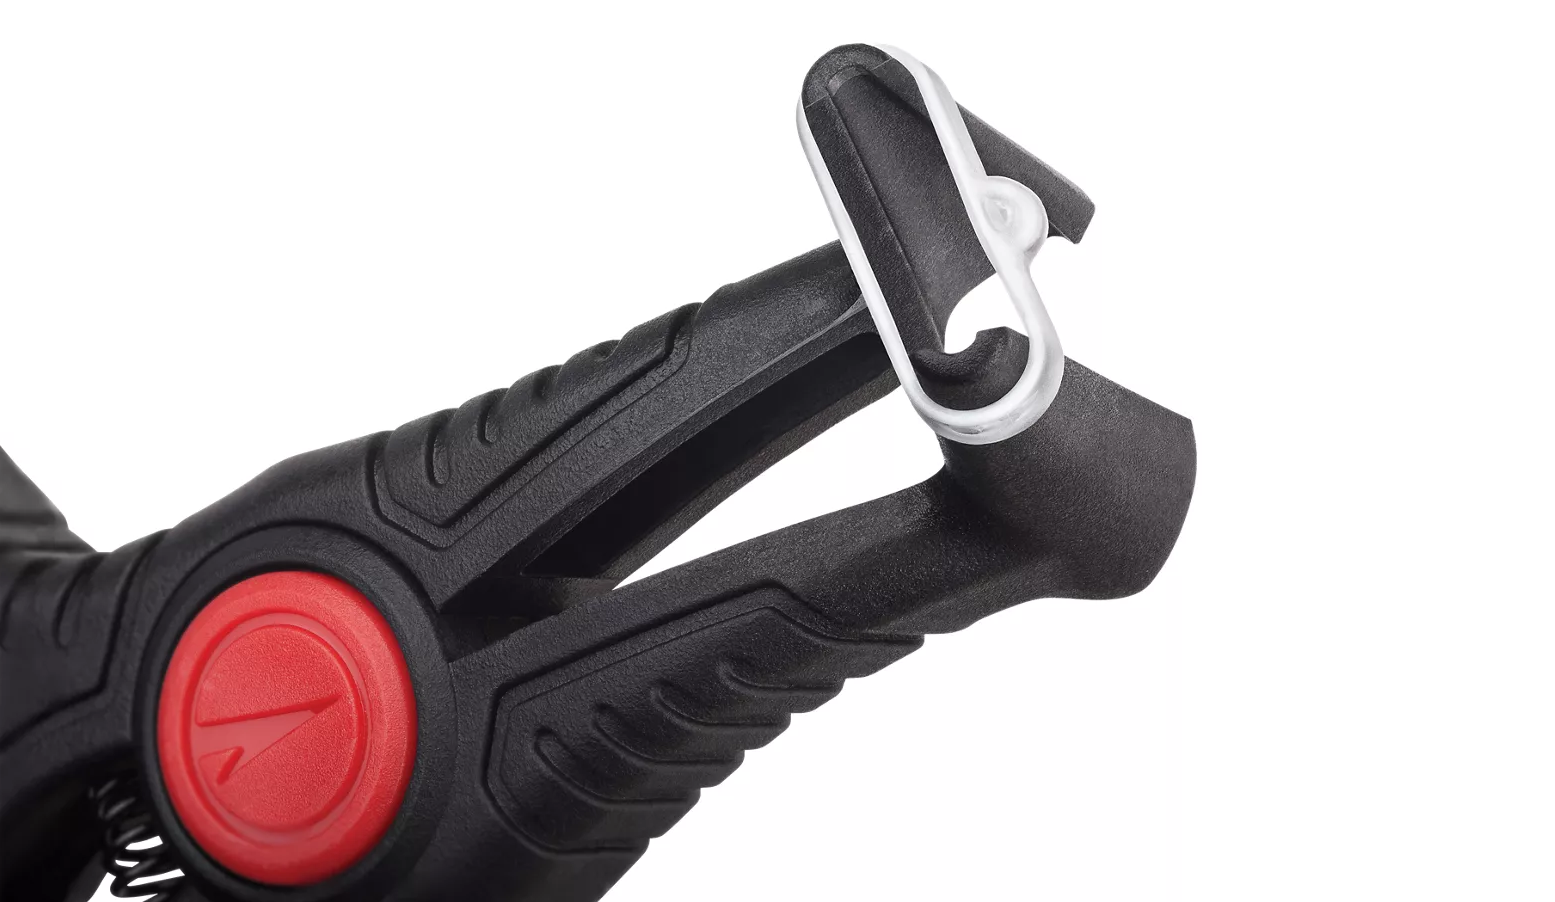 VMC Crossover Pliers Review - Wired2Fish